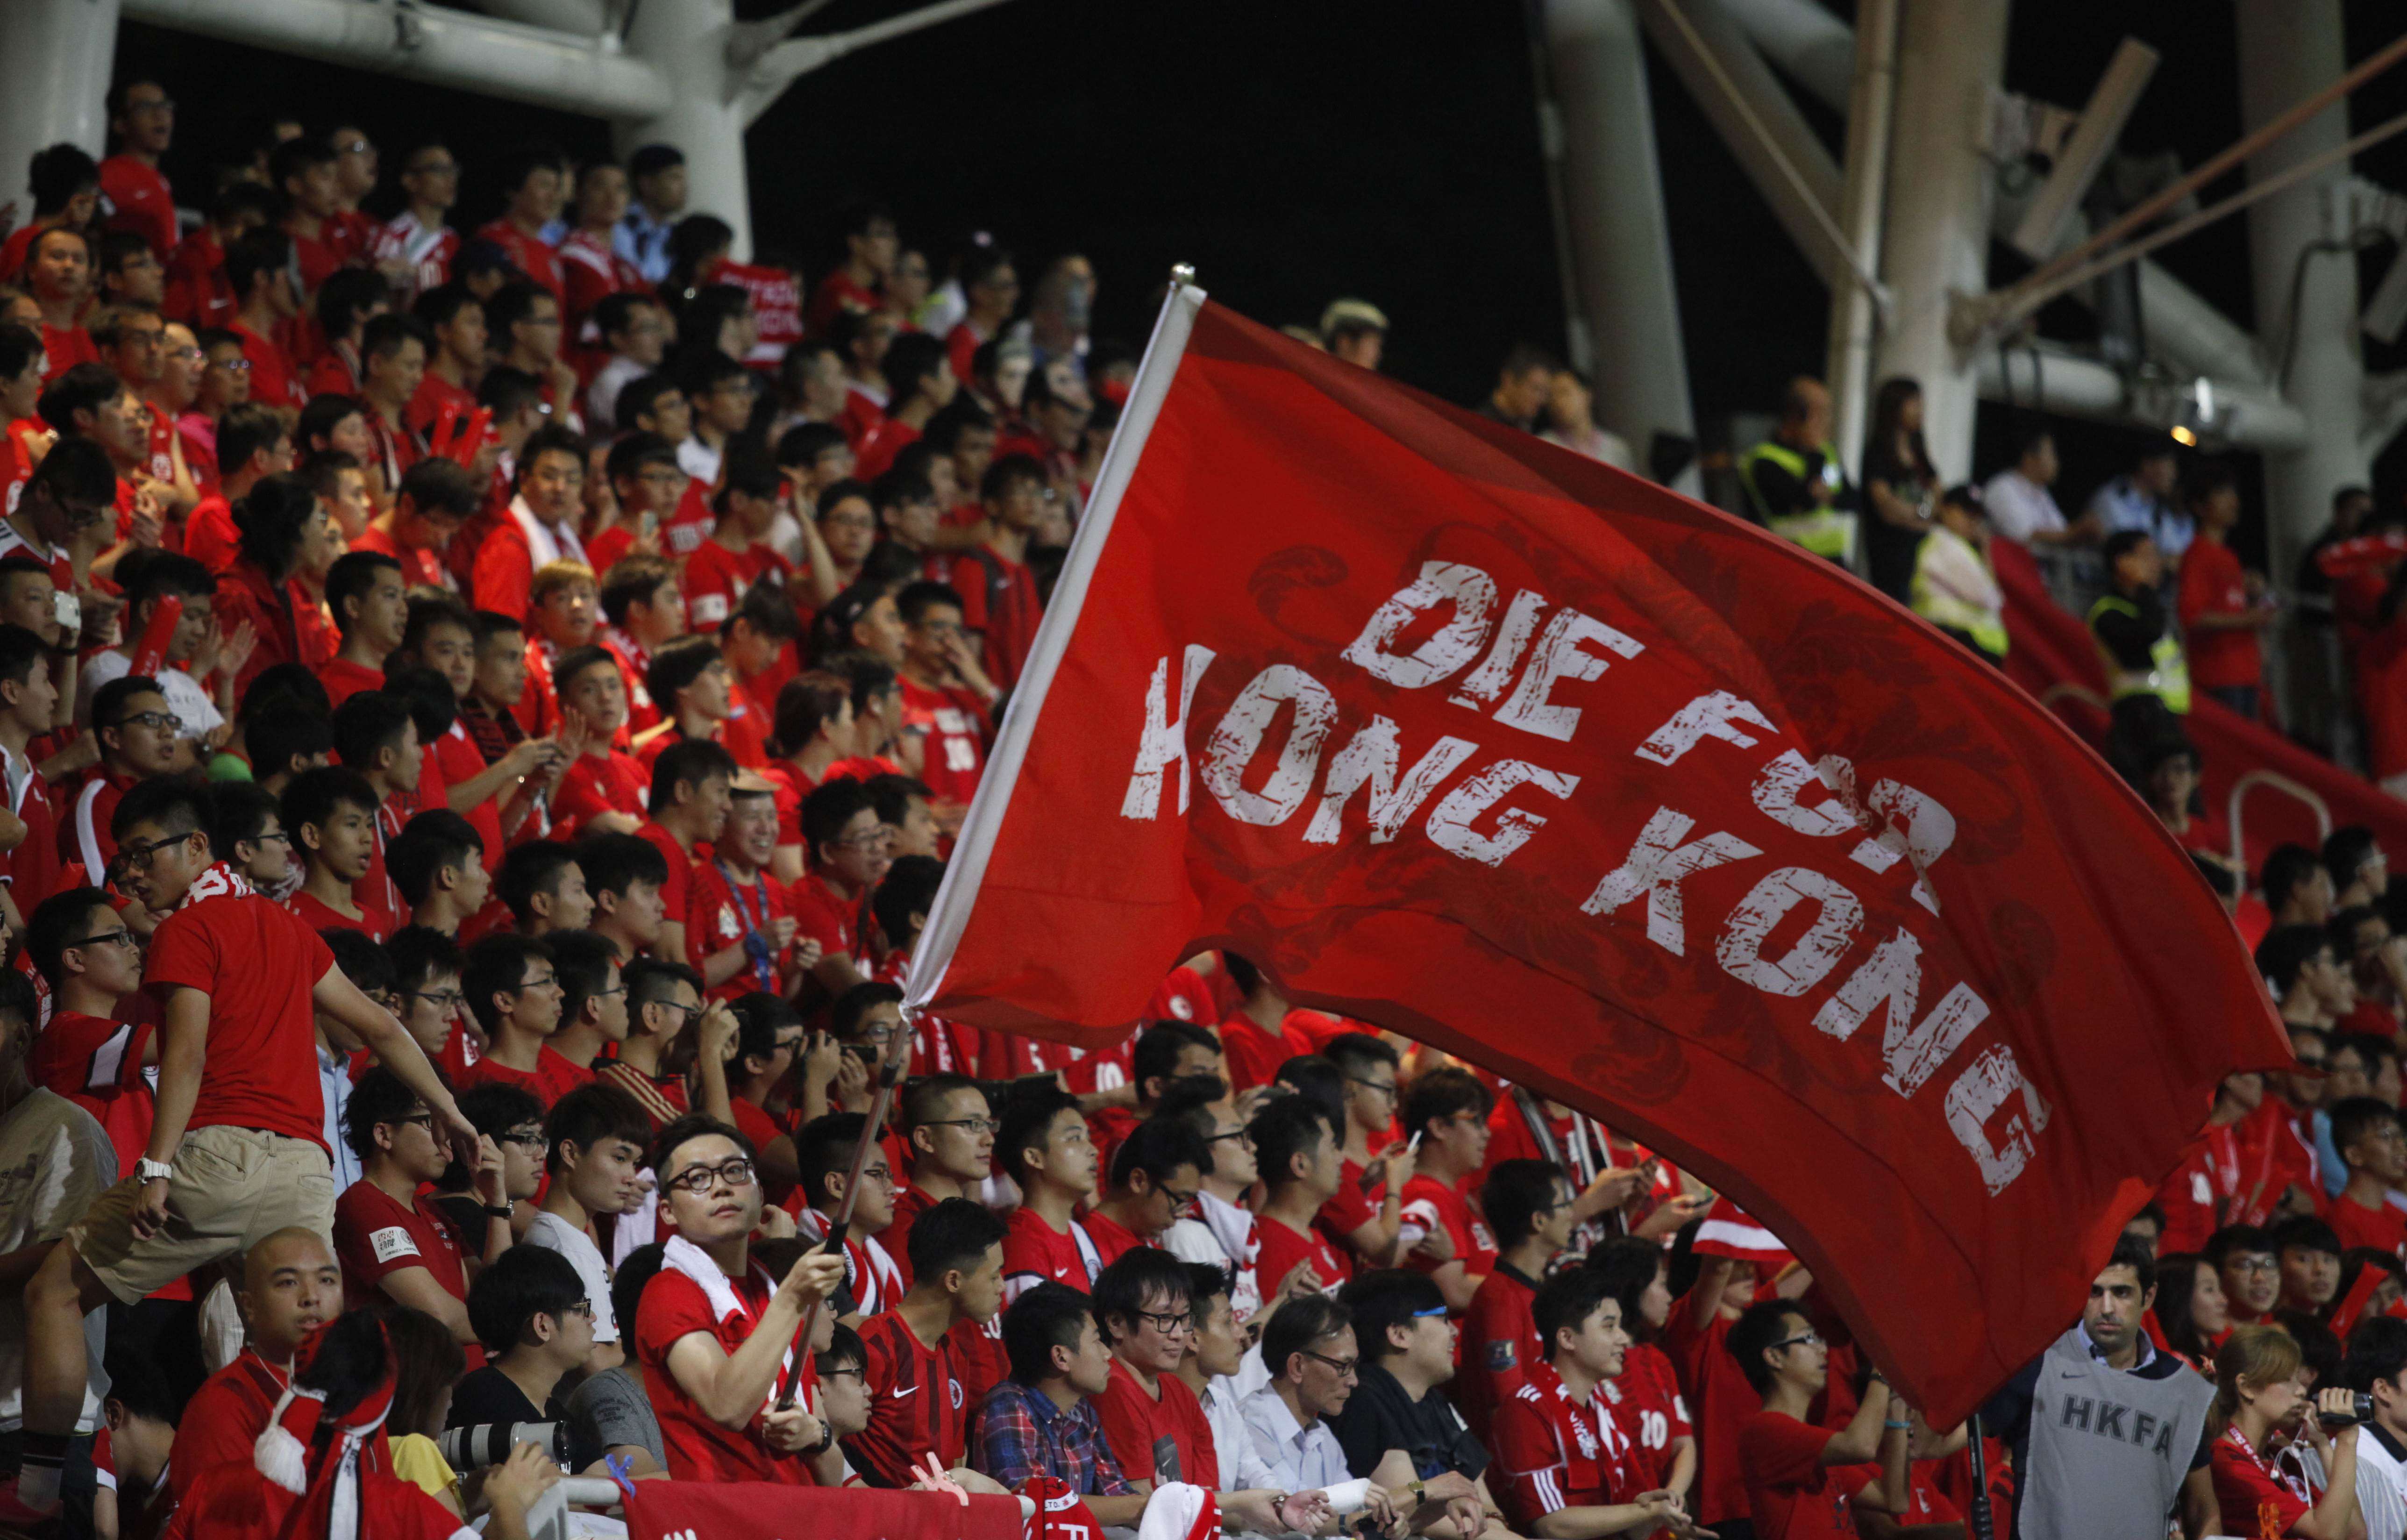 A Hong Kong football fan waves a flag during a world cup qualifier at Mong Kok Stadium last year. Hong Kong fans booed the anthem they share with China while some turned their backs in a show of defiance. Photo: AFP